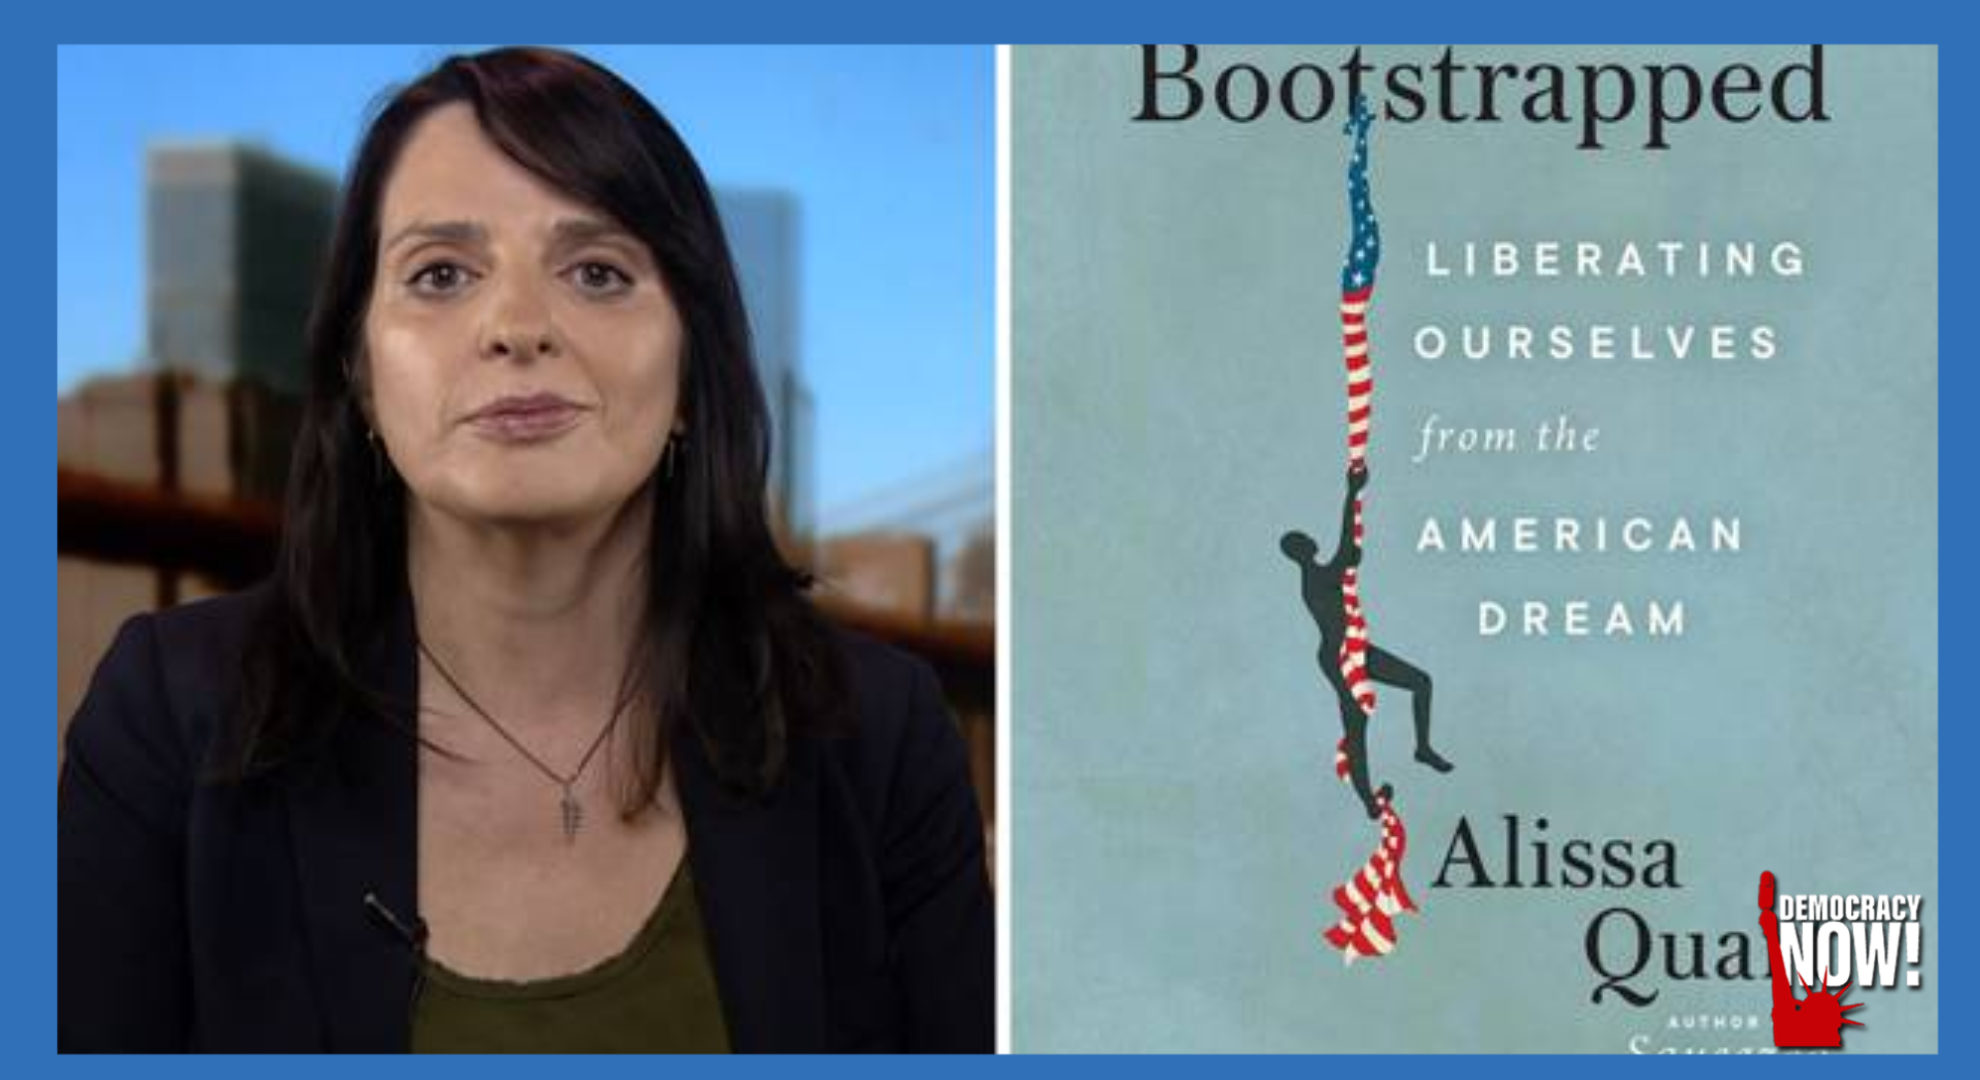 "Bootstrapped": Alissa Quart on Liberating Ourselves from the Myth of the American Dream